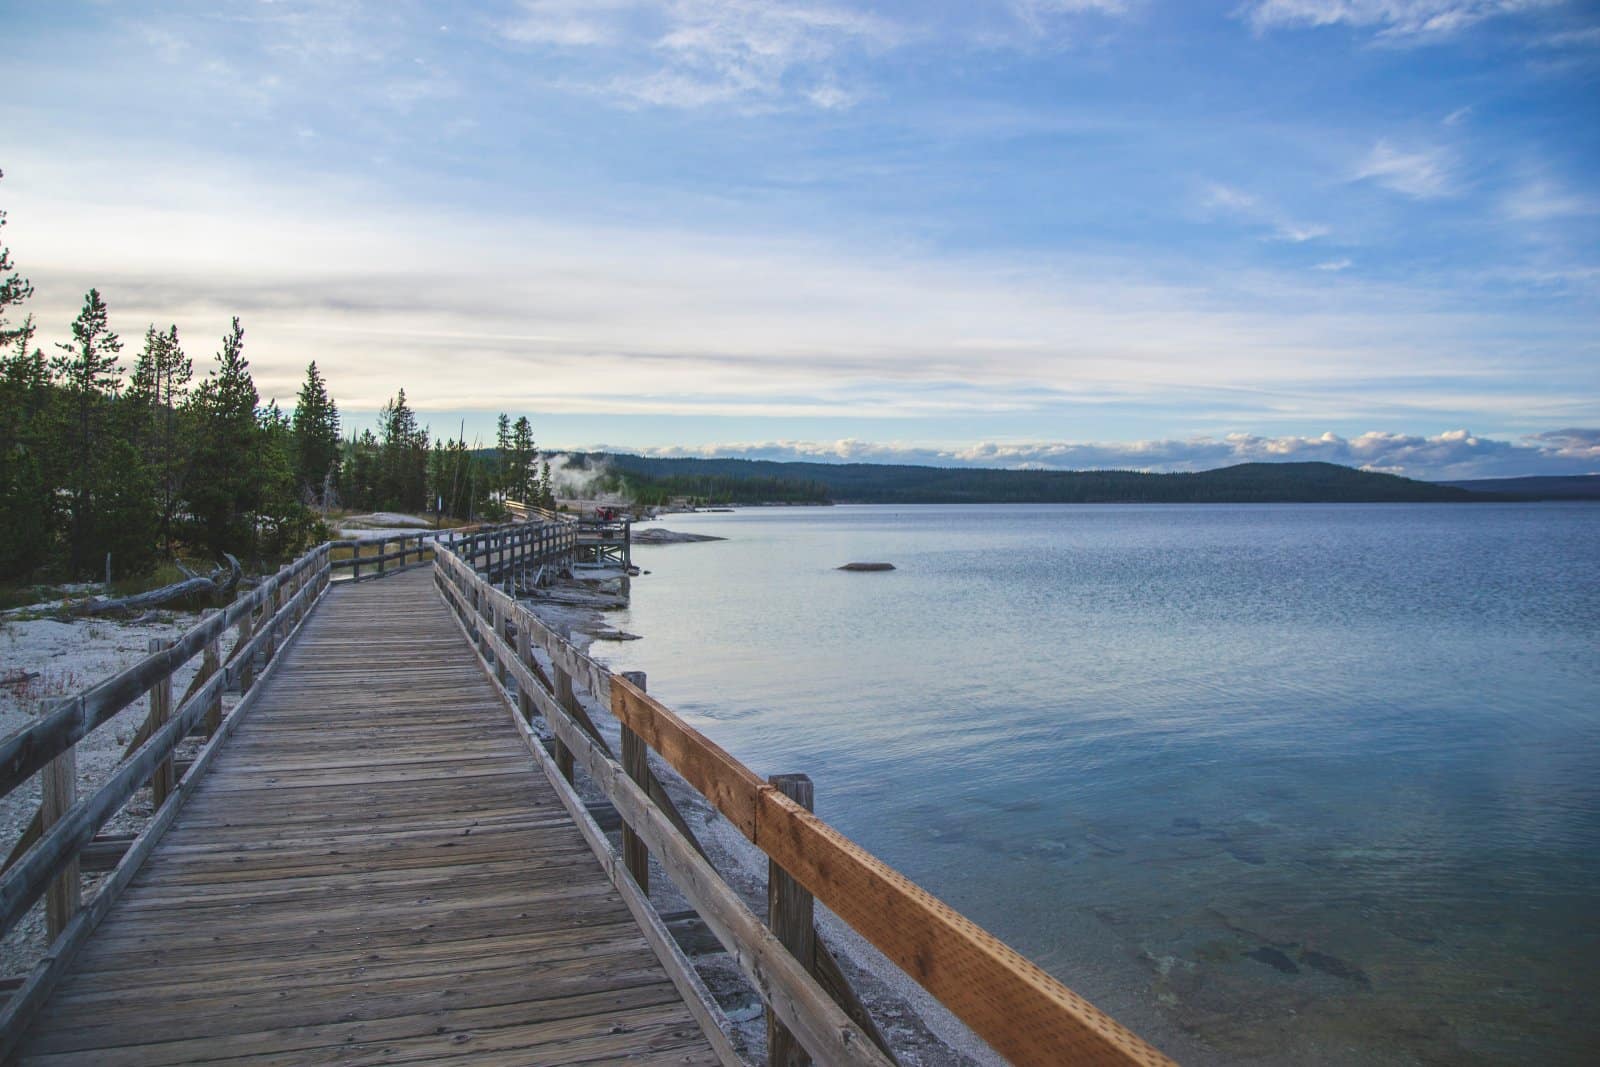 <p><span>For lunch, I chose a quiet spot by Yellowstone Lake to enjoy a picnic I had prepared. The lake’s crystal-clear waters were breathtaking as I unwrapped my sandwiches and took in the stunning views. The tranquility of the lake was a peaceful interlude for the day’s adventures.</span></p> <p><b>Fellow Traveler Tip: </b><span>Pack a picnic to eat lunch in the park, as there are no restaurant options to ensure you have more time to sightsee.</span></p>